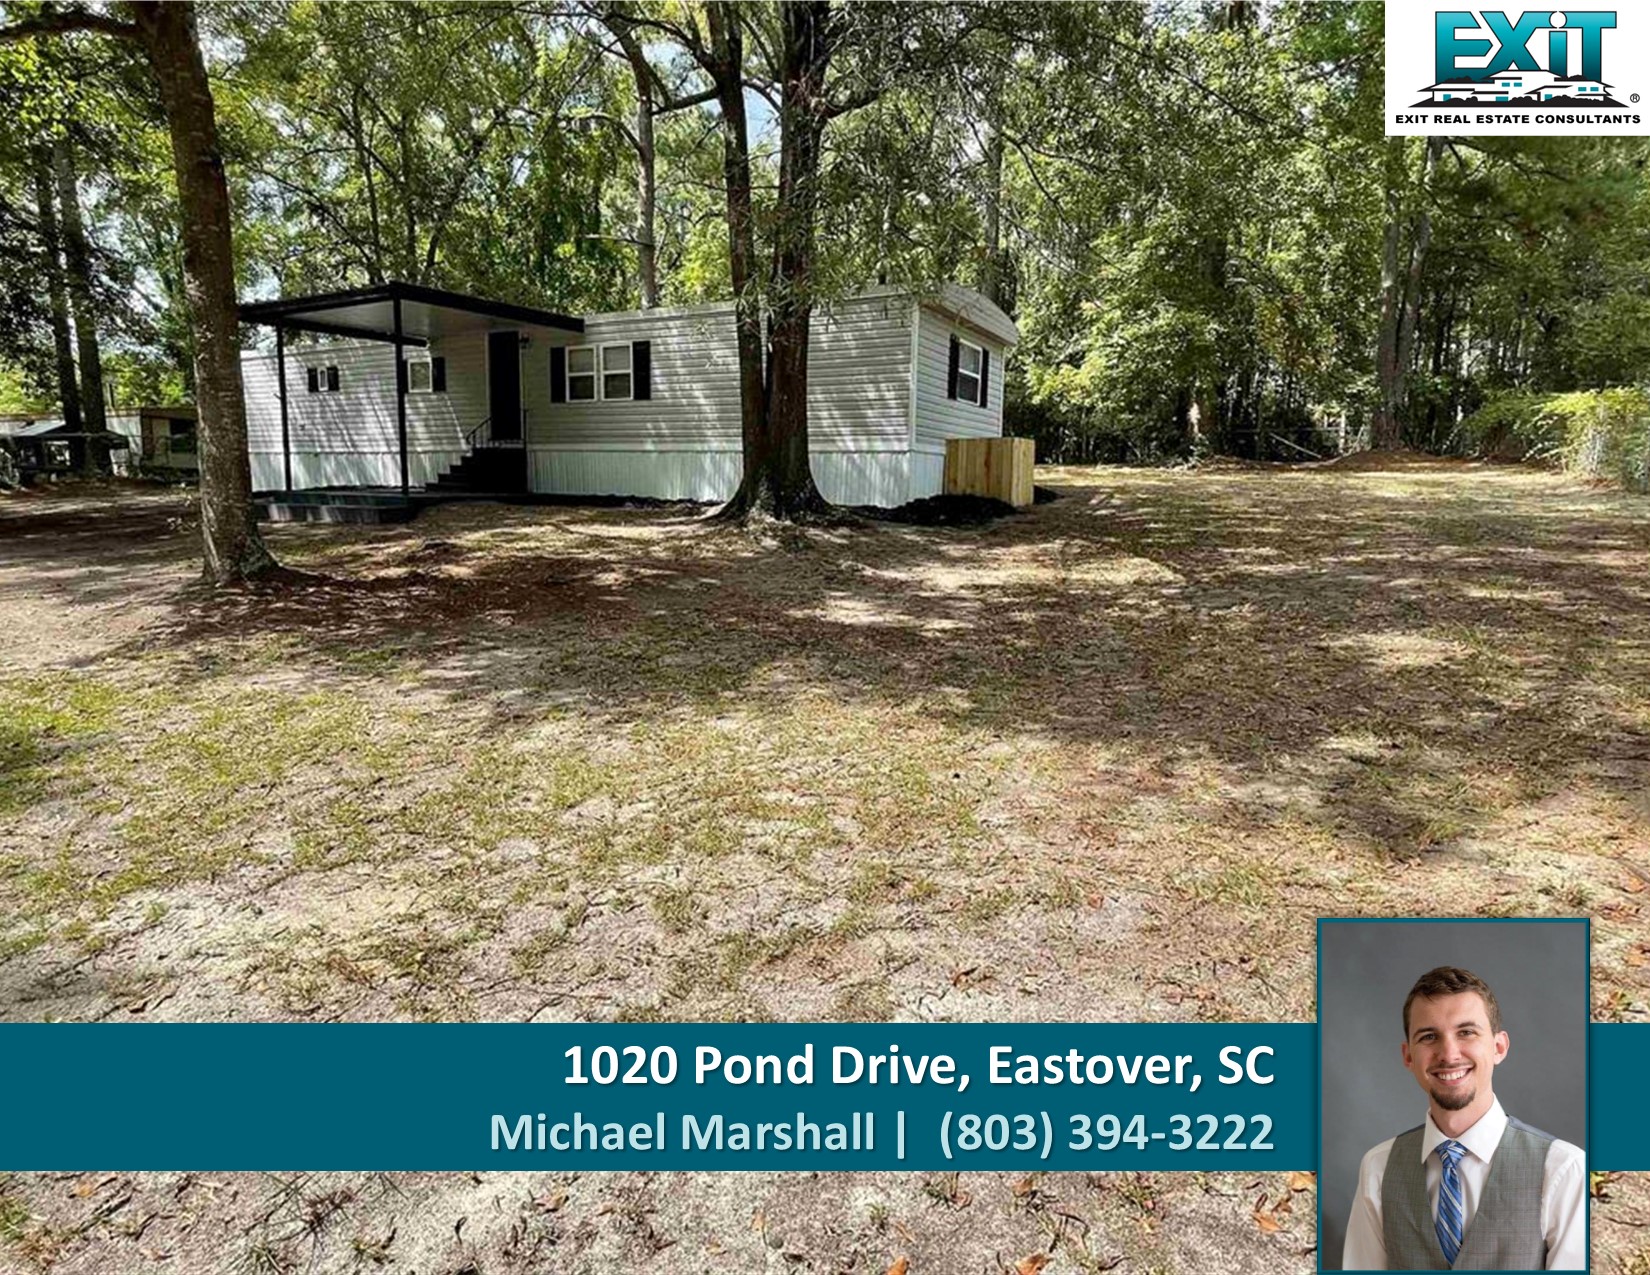 Just listed in Eastover